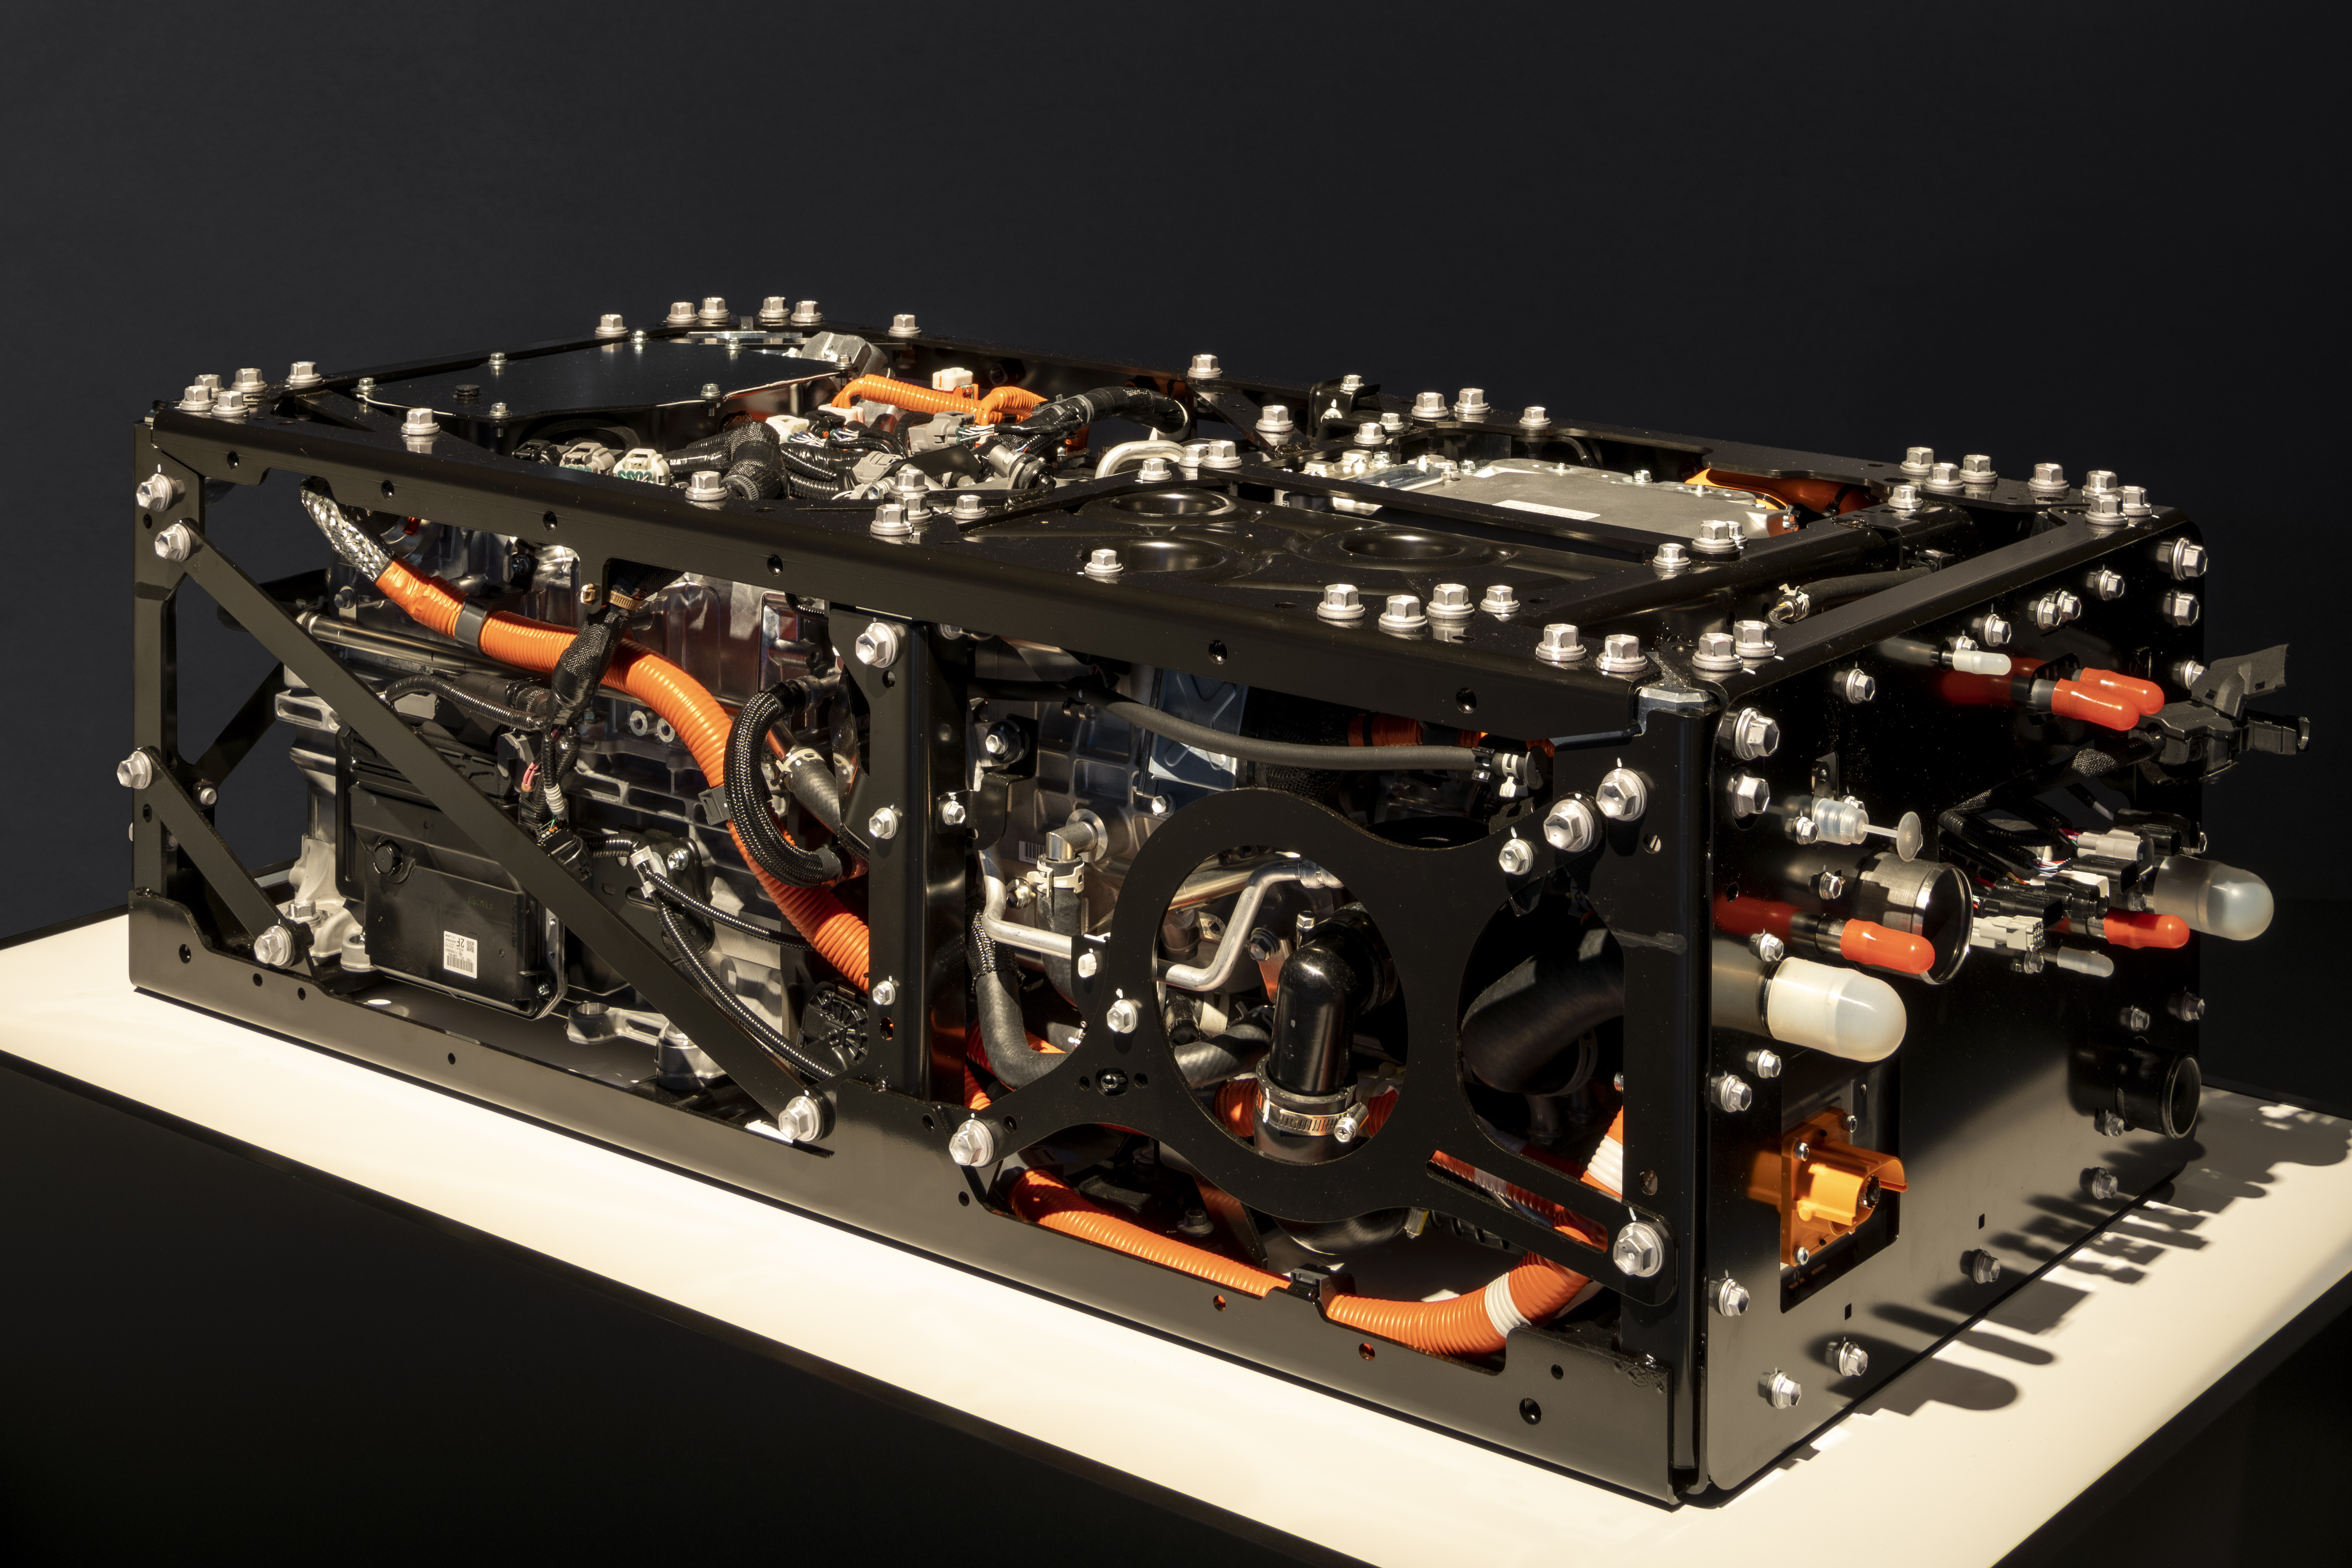 Toyota Motor Europe delivers 6 fuel cell modules for FCH2Rai